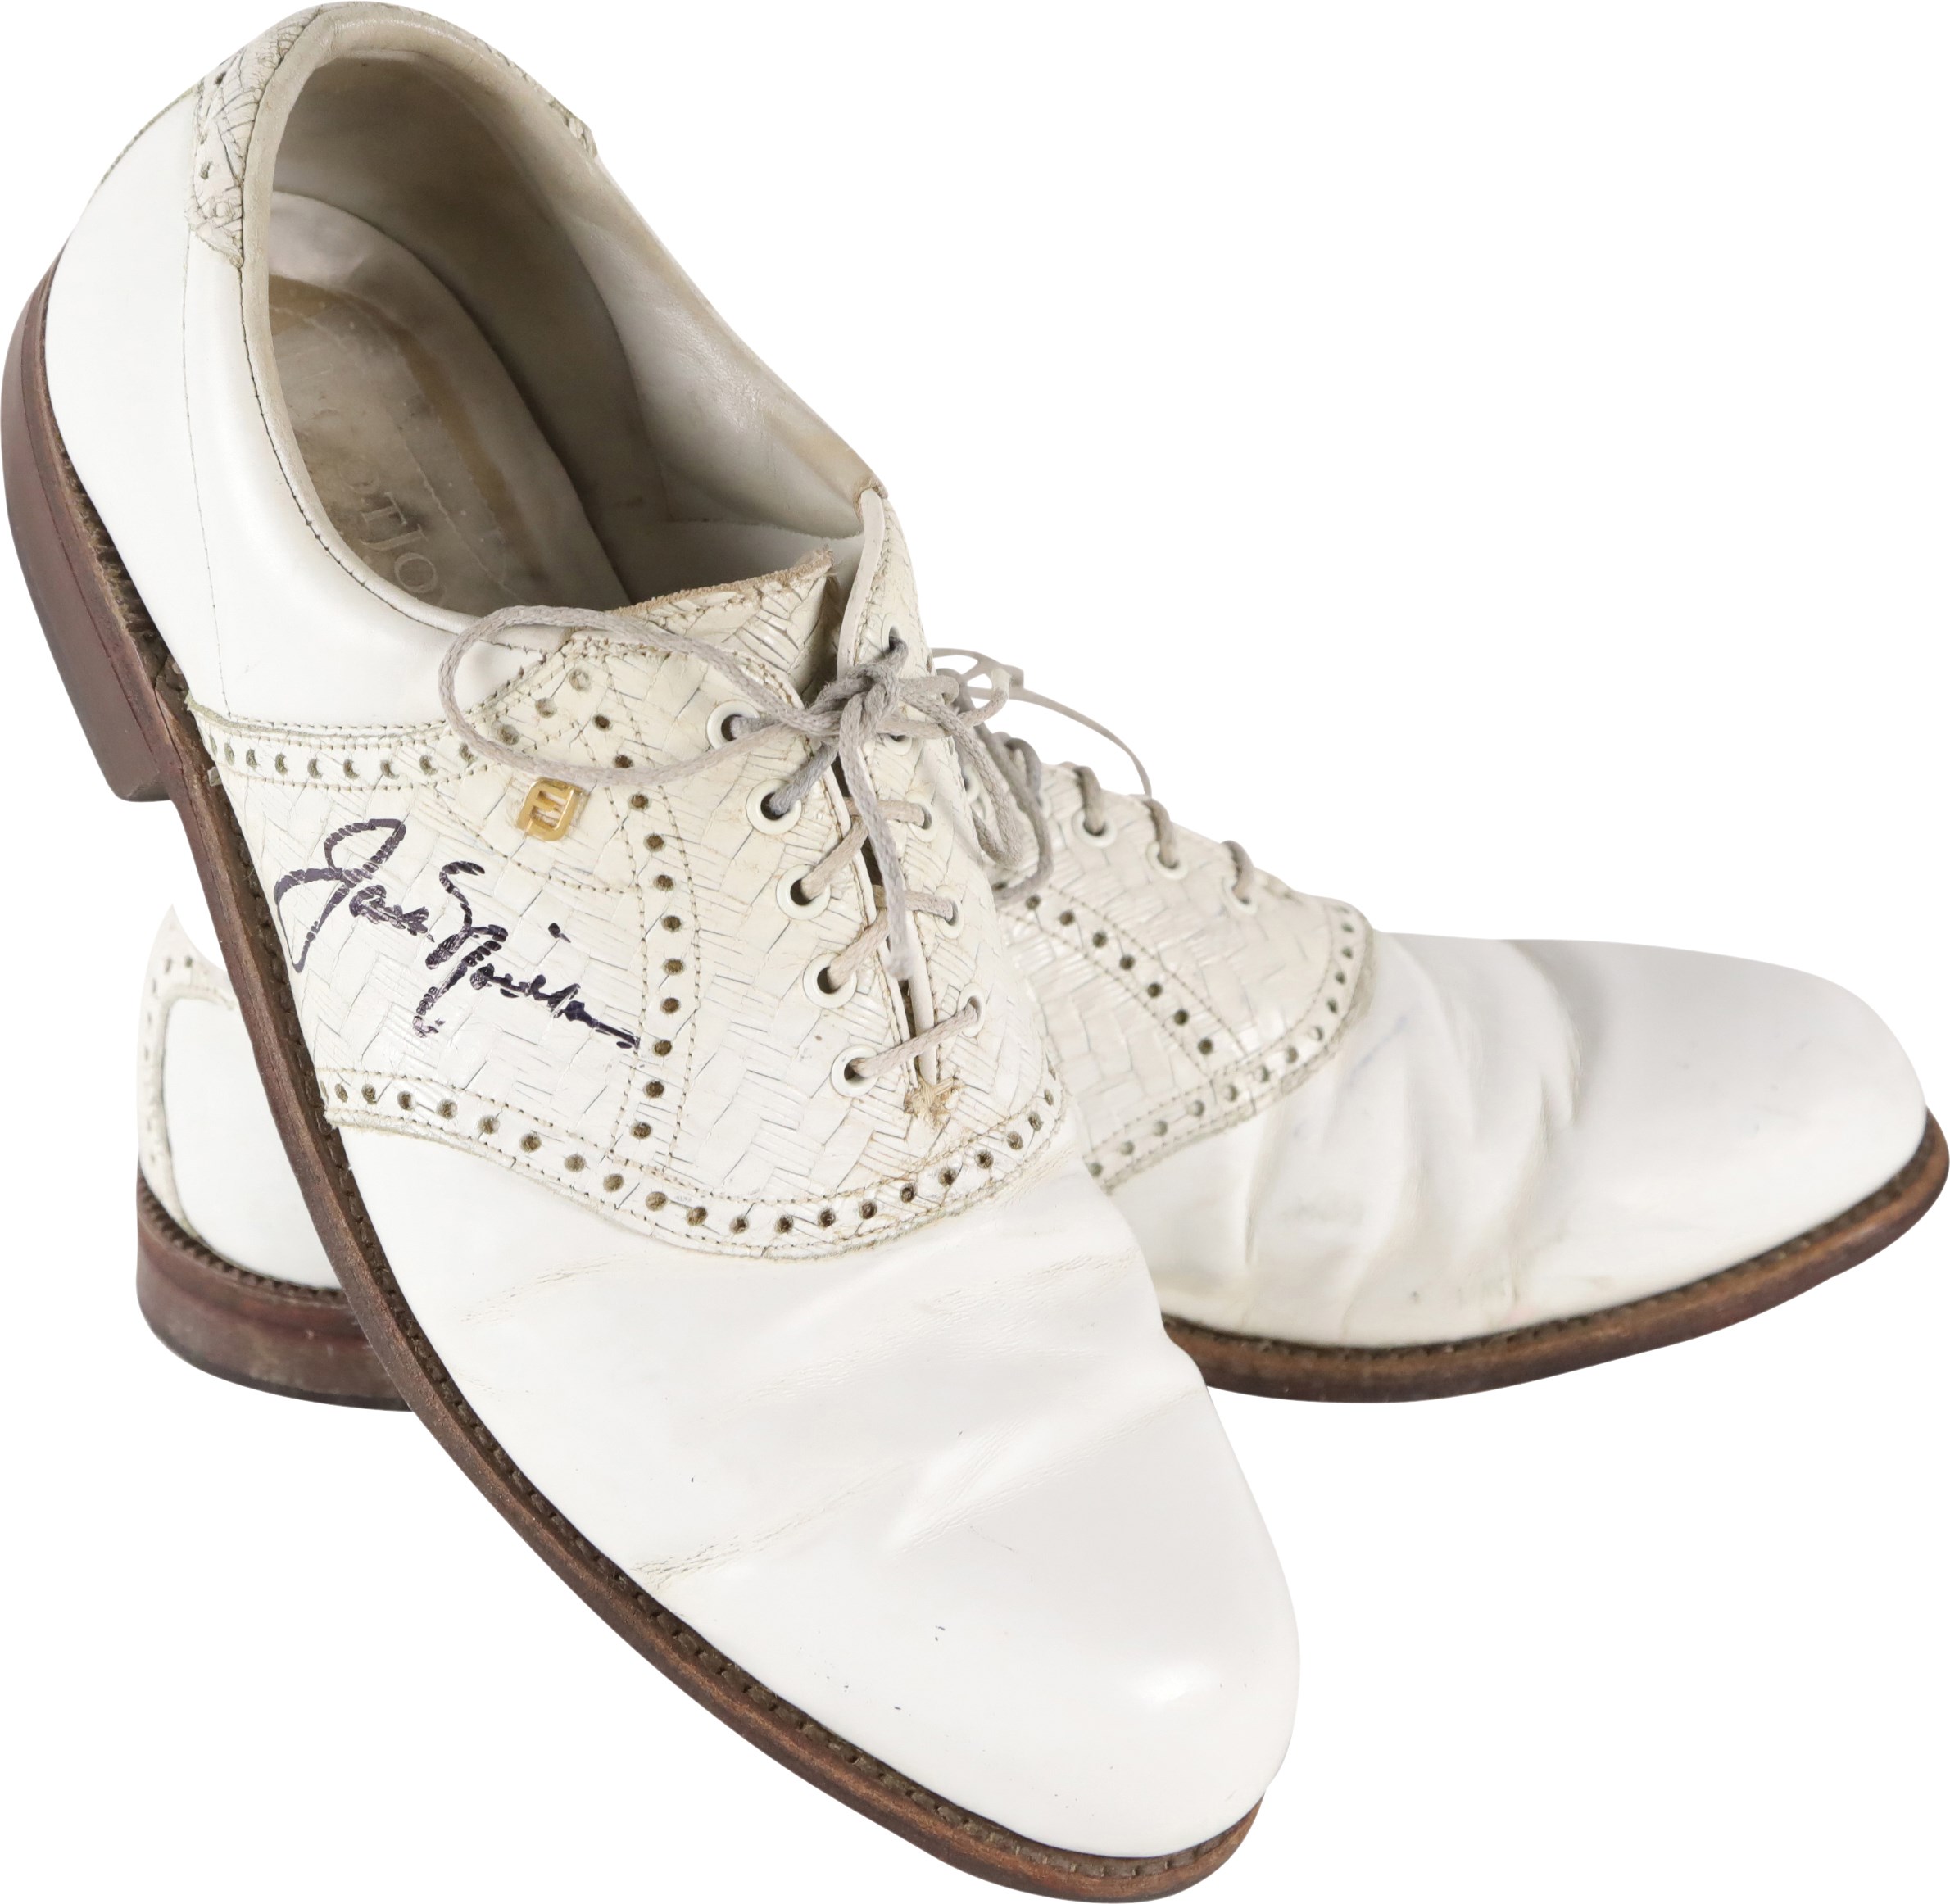 Olympics and All Sports - Jack Nicklaus Signed Worn Golf Shoes from Round with George W. Bush